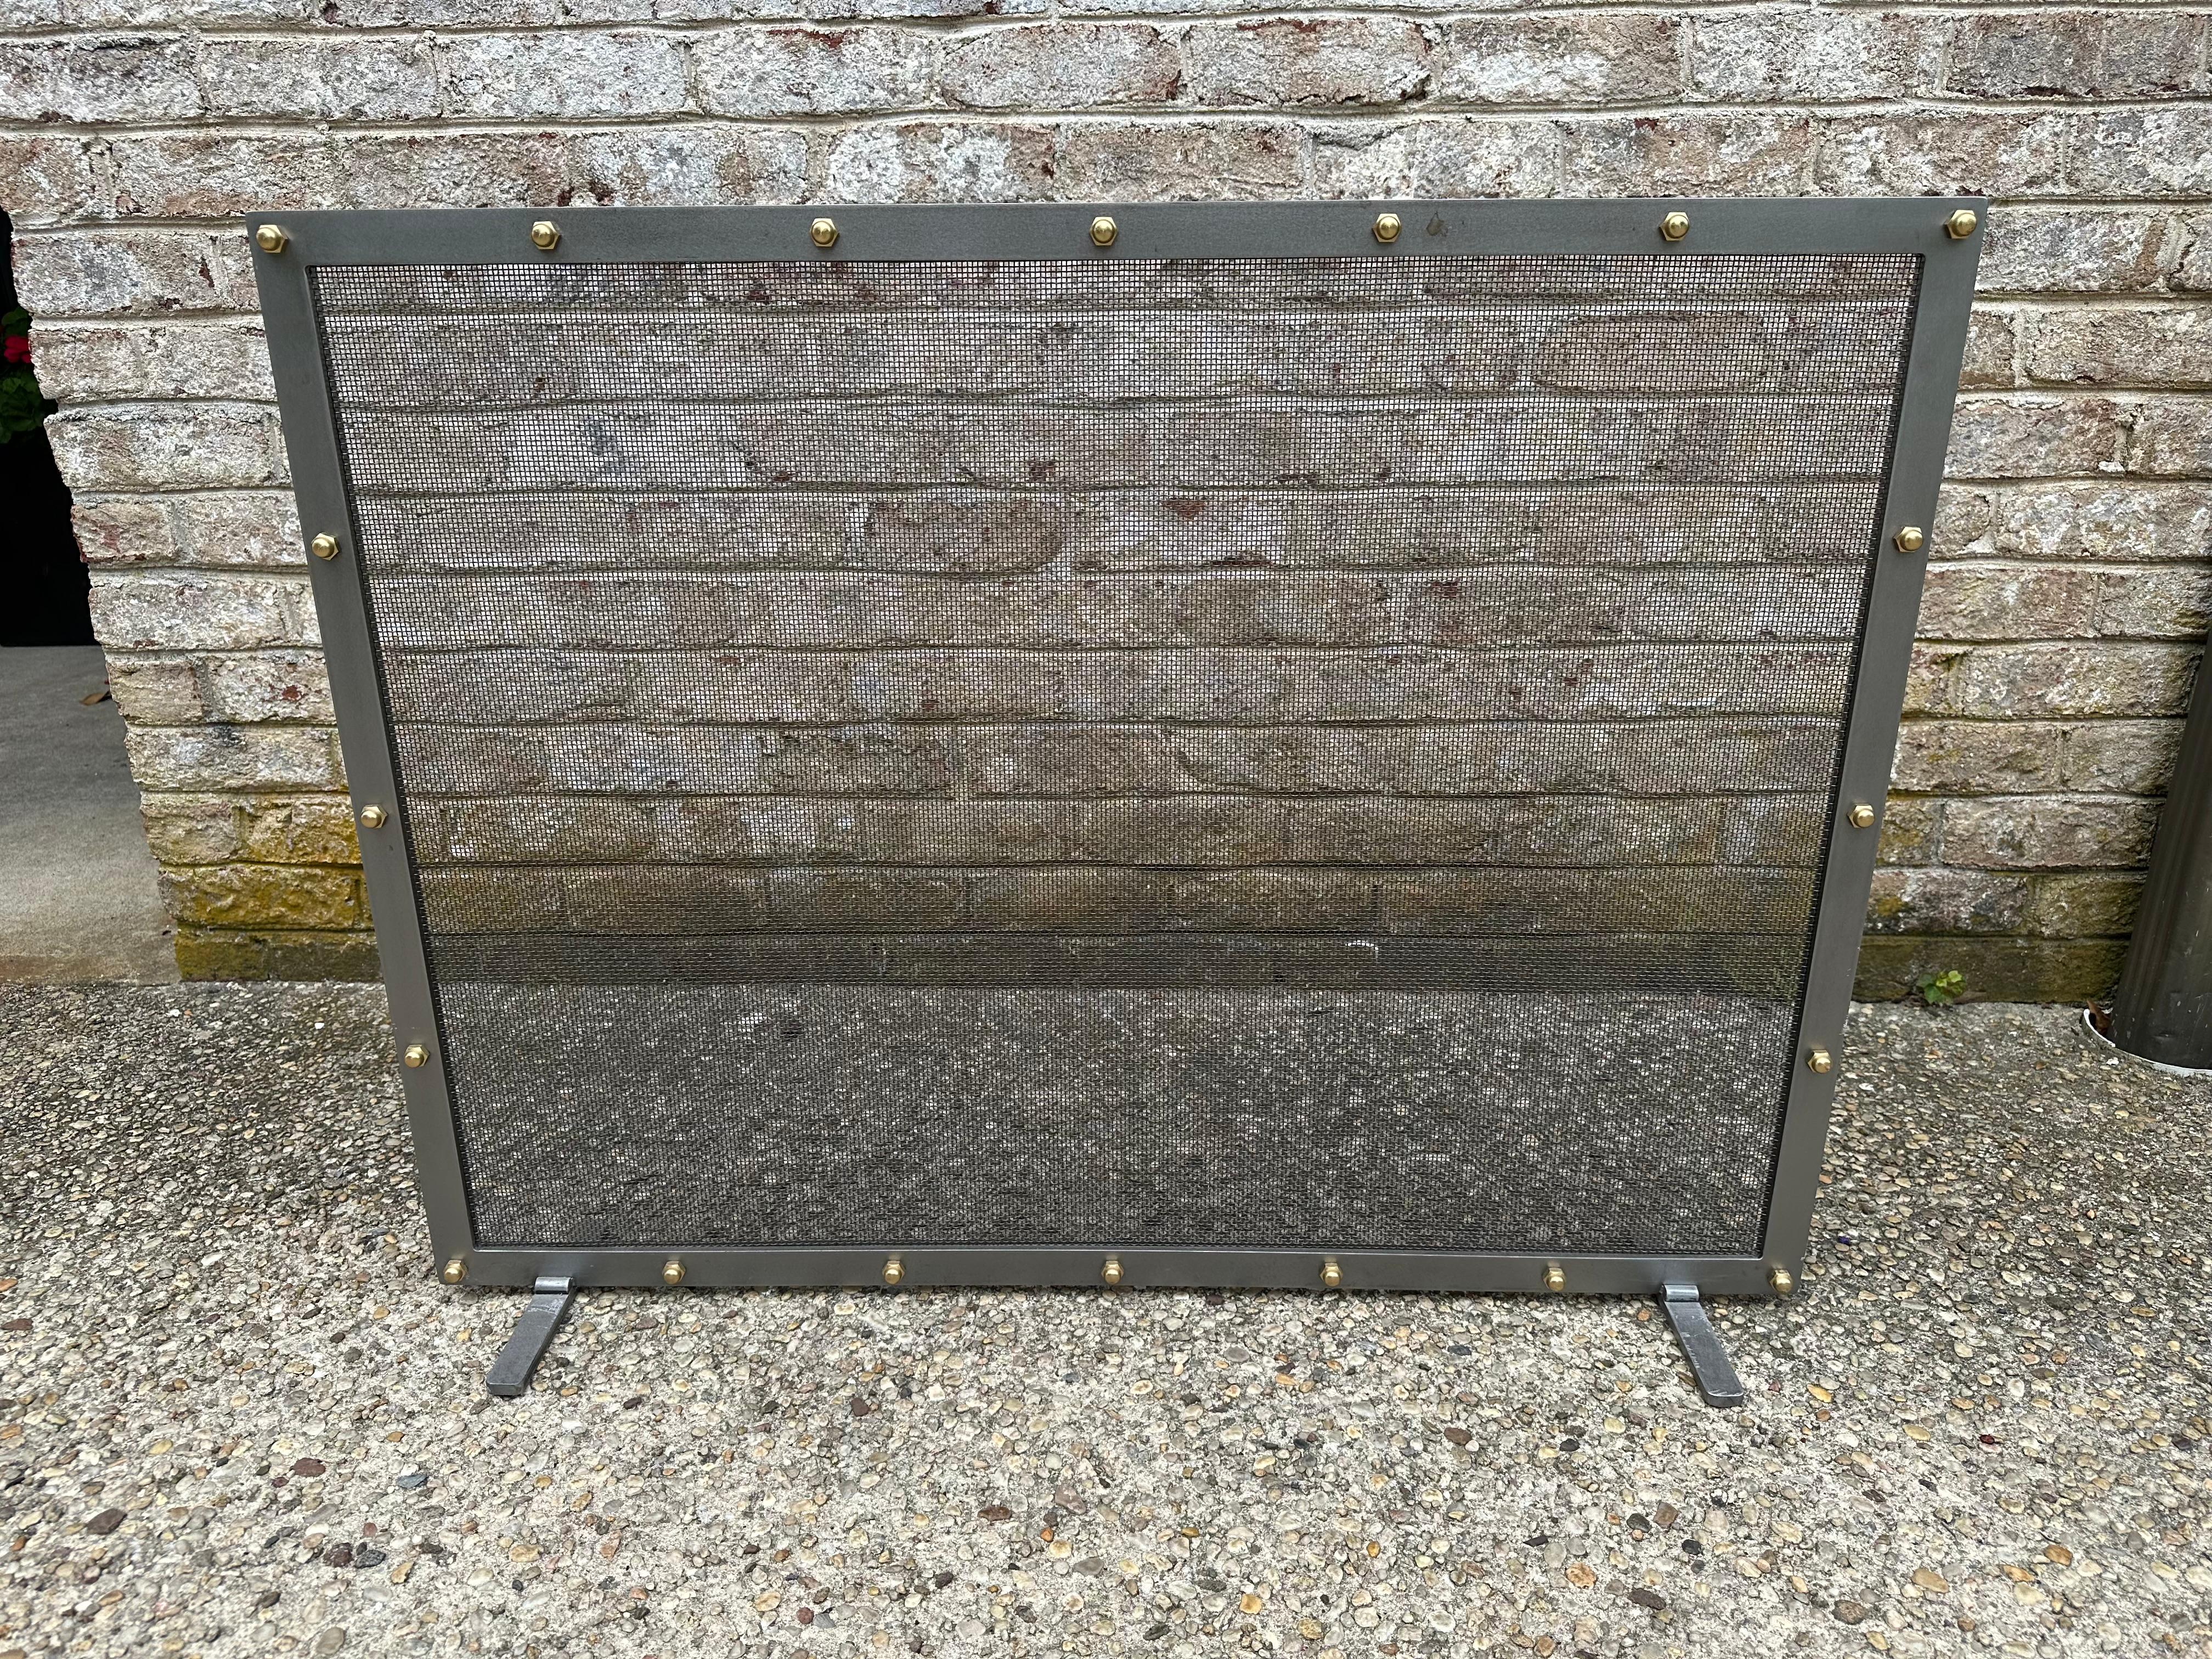 Custom handcrafted fireplace screens made out of iron, brass knots, and brass or steel mesh.

Price may vary depending on size.